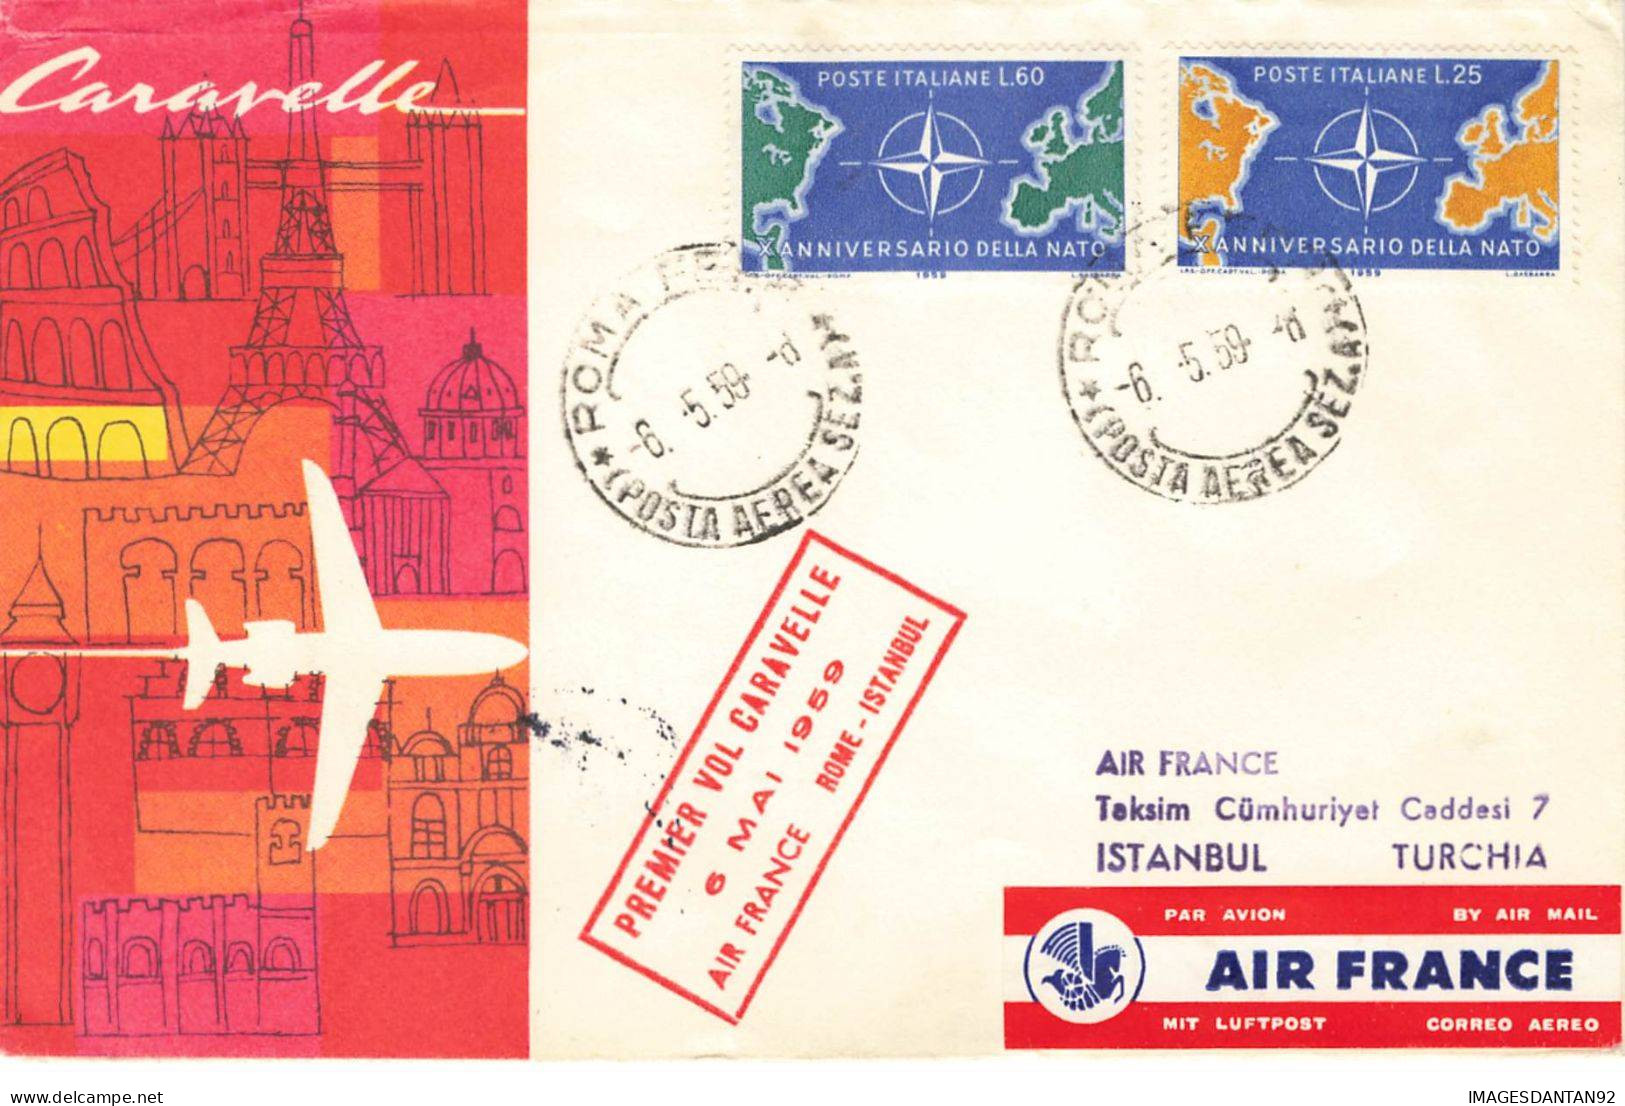 FRANCE #36360 AIR FRANCE PRMIERE BOL CARAVELLE ROME ISTANBUL 1959 - Lettres & Documents